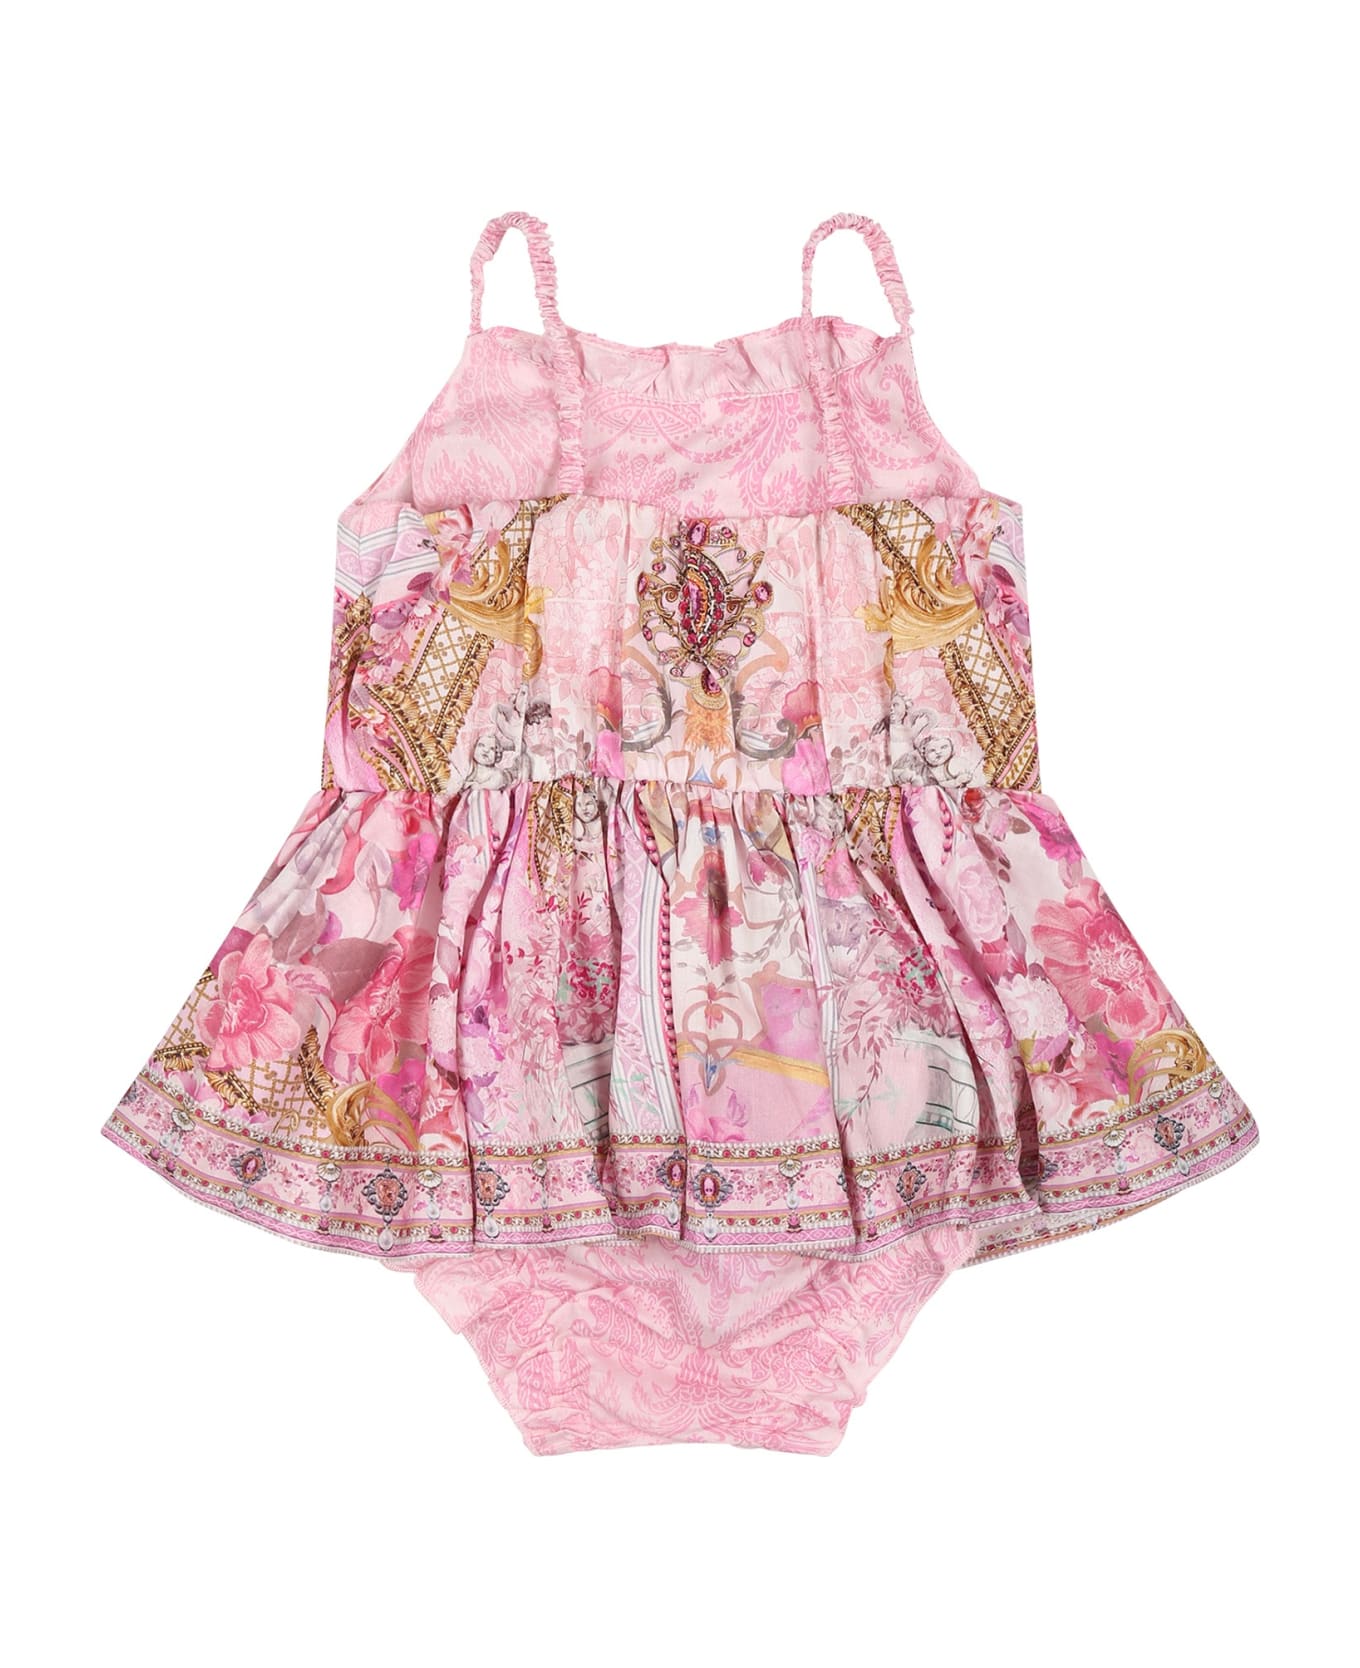 Camilla Pink Romper For Baby Girl With Floral Print - Pink